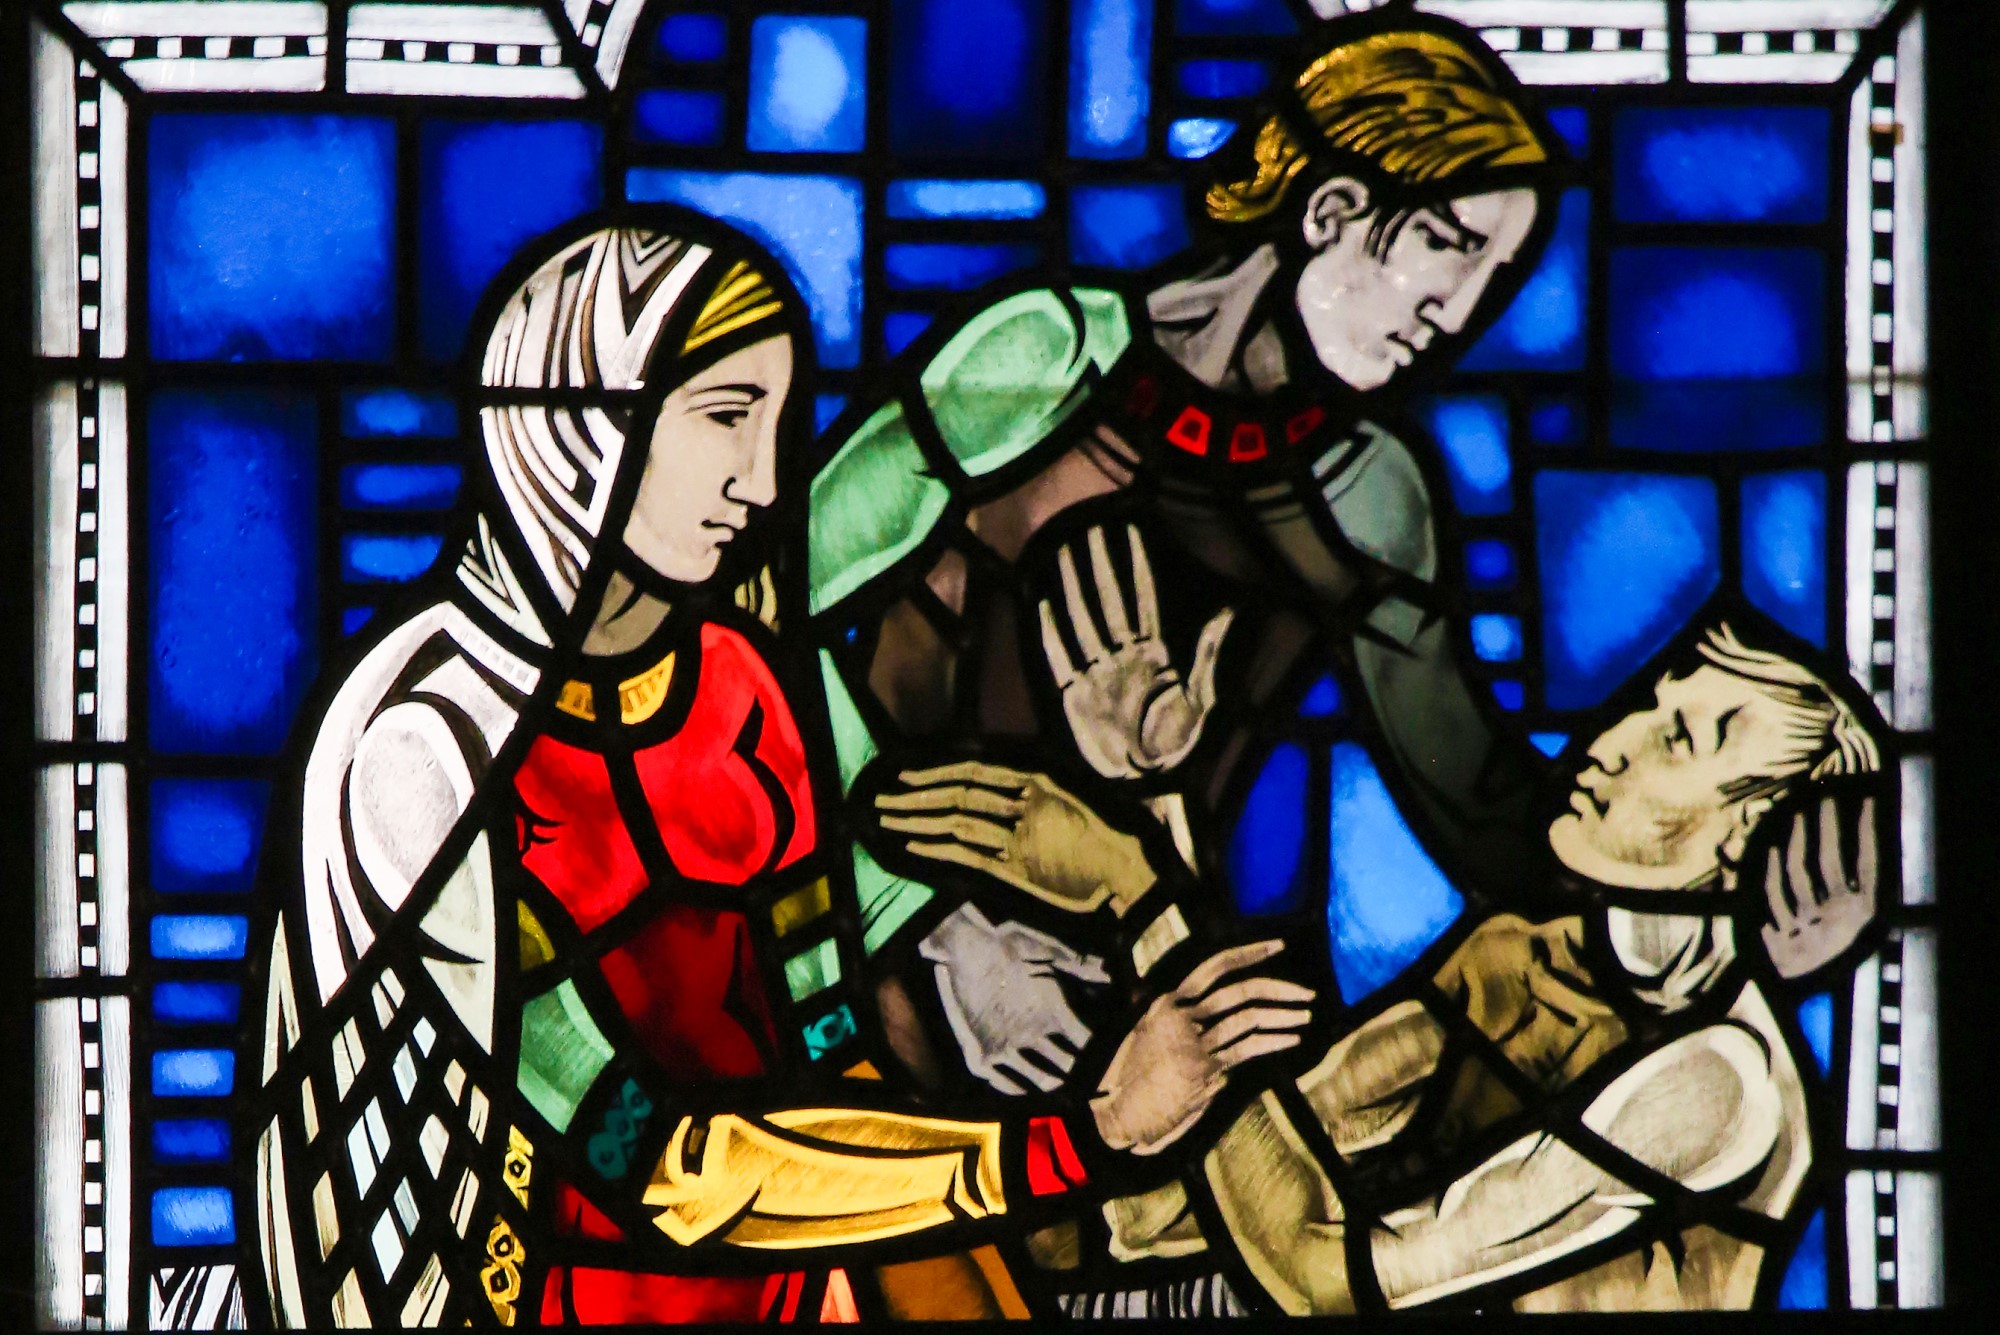 stained glass depicting two figured displaying mercy to dying man